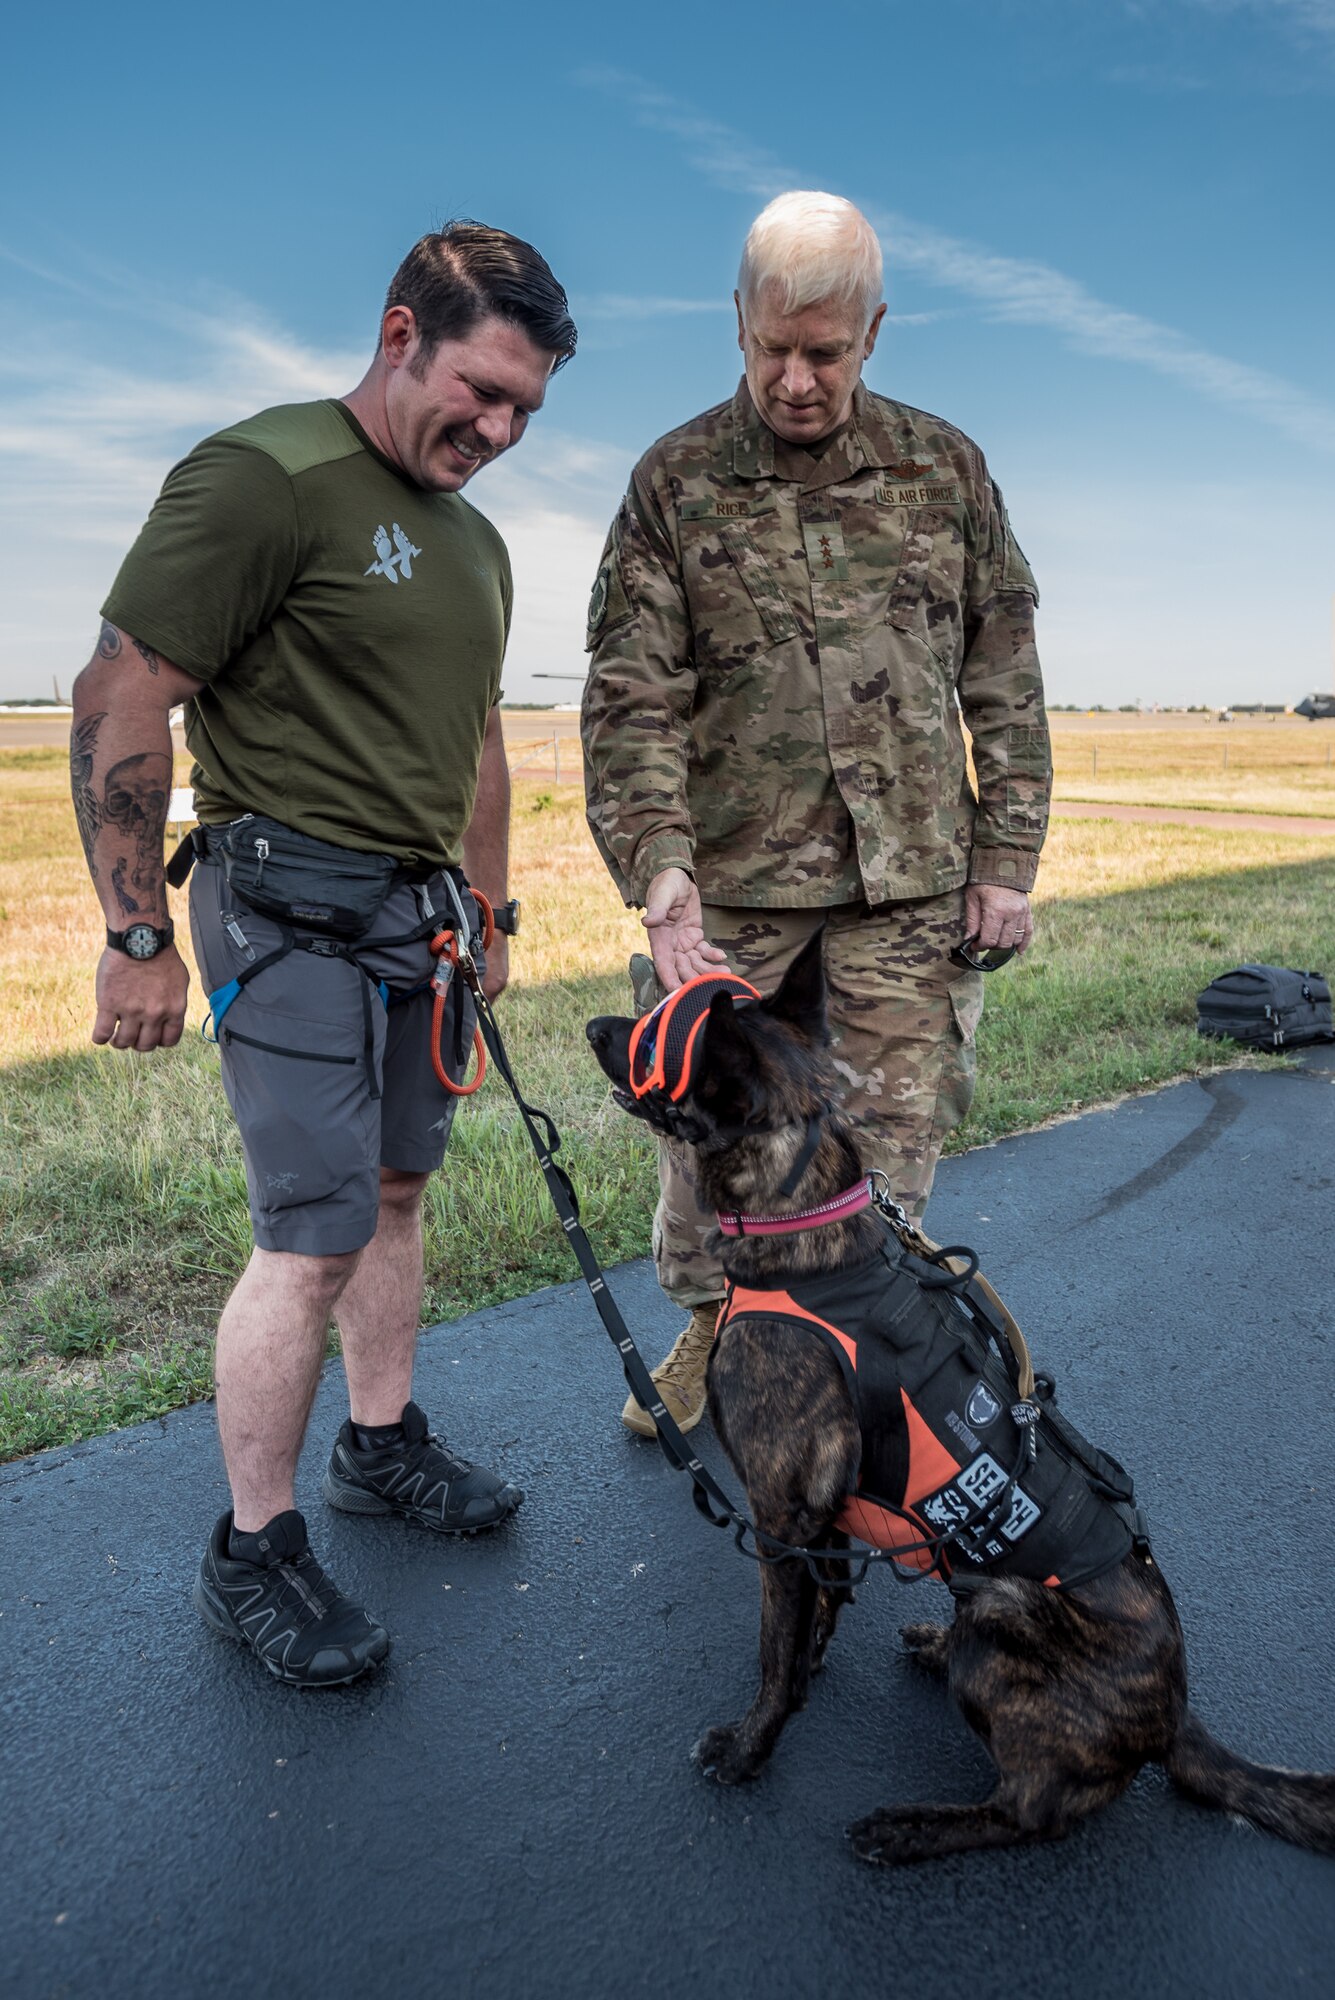 Lt. Gen. L. Scott Rice (right), director of the Air National Guard, meets Callie, the only search-and-rescue dog in the Department of Defense, and her handler, Master Sgt. Rudy Parsons, a pararescueman in the 123rd Special Tactics Squadron, during a visit to the Kentucky Air National Guard Base in Louisville, Ky. Aug. 10, 2019. (U.S. Air National Guard photo by Lt. Col. Dale Greer)